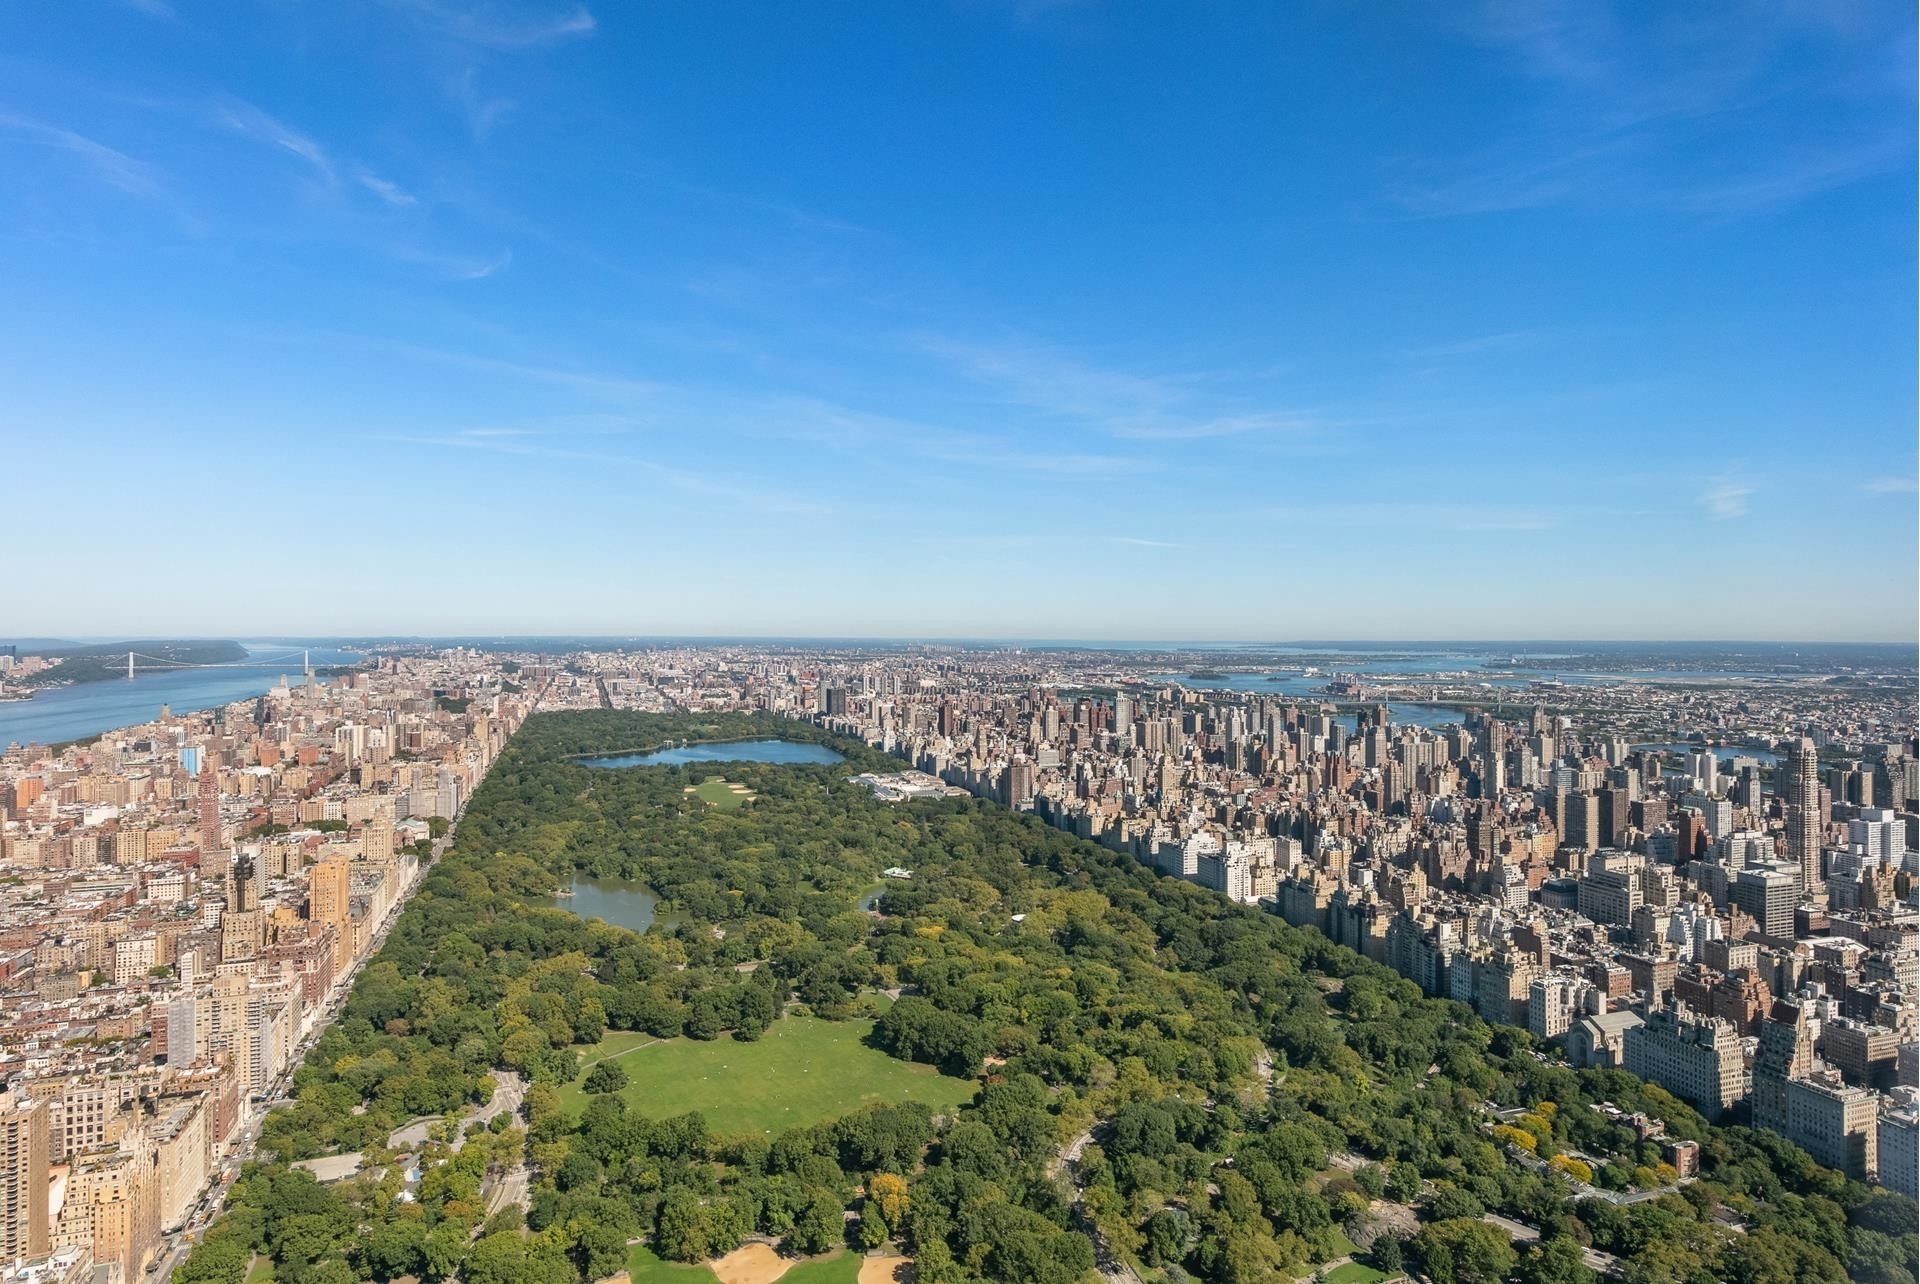 Condominium for Sale at Central Park Tower, 217 W 57TH ST, 97E Midtown West, New York, NY 10019